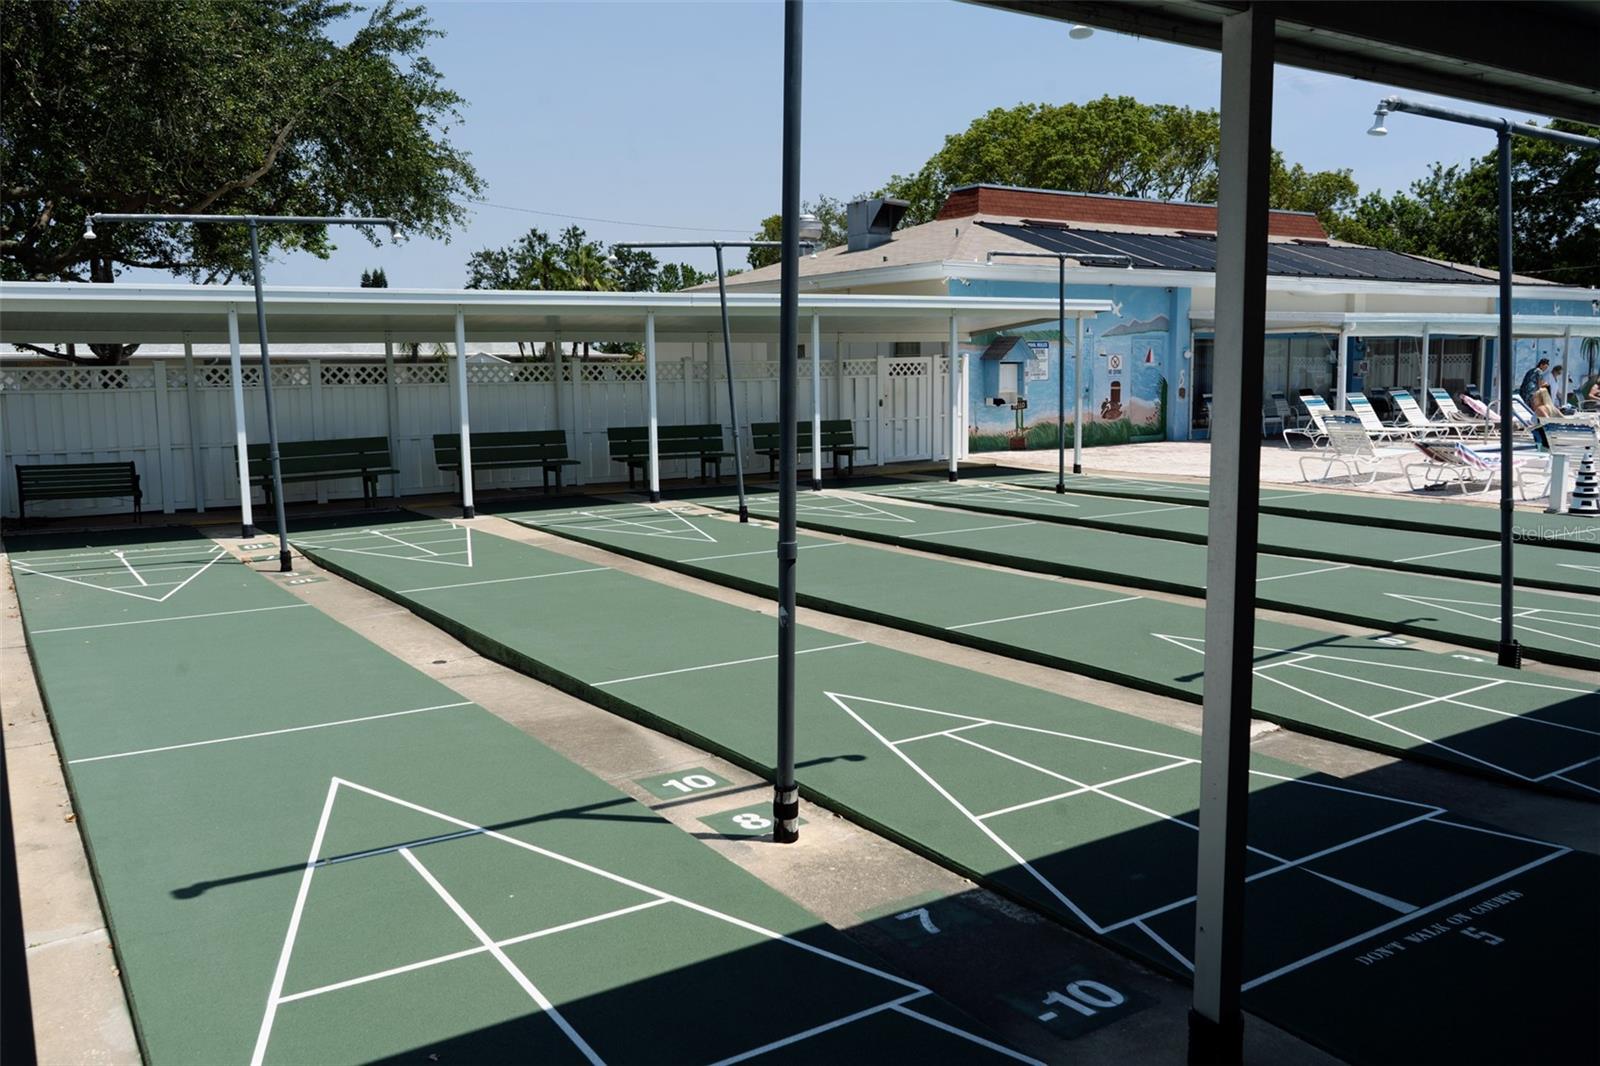 Shuffleboard fun awaits! Embrace leisurely afternoons enjoying a game of shuffleboard with friends and neighbors in your vibrant community.